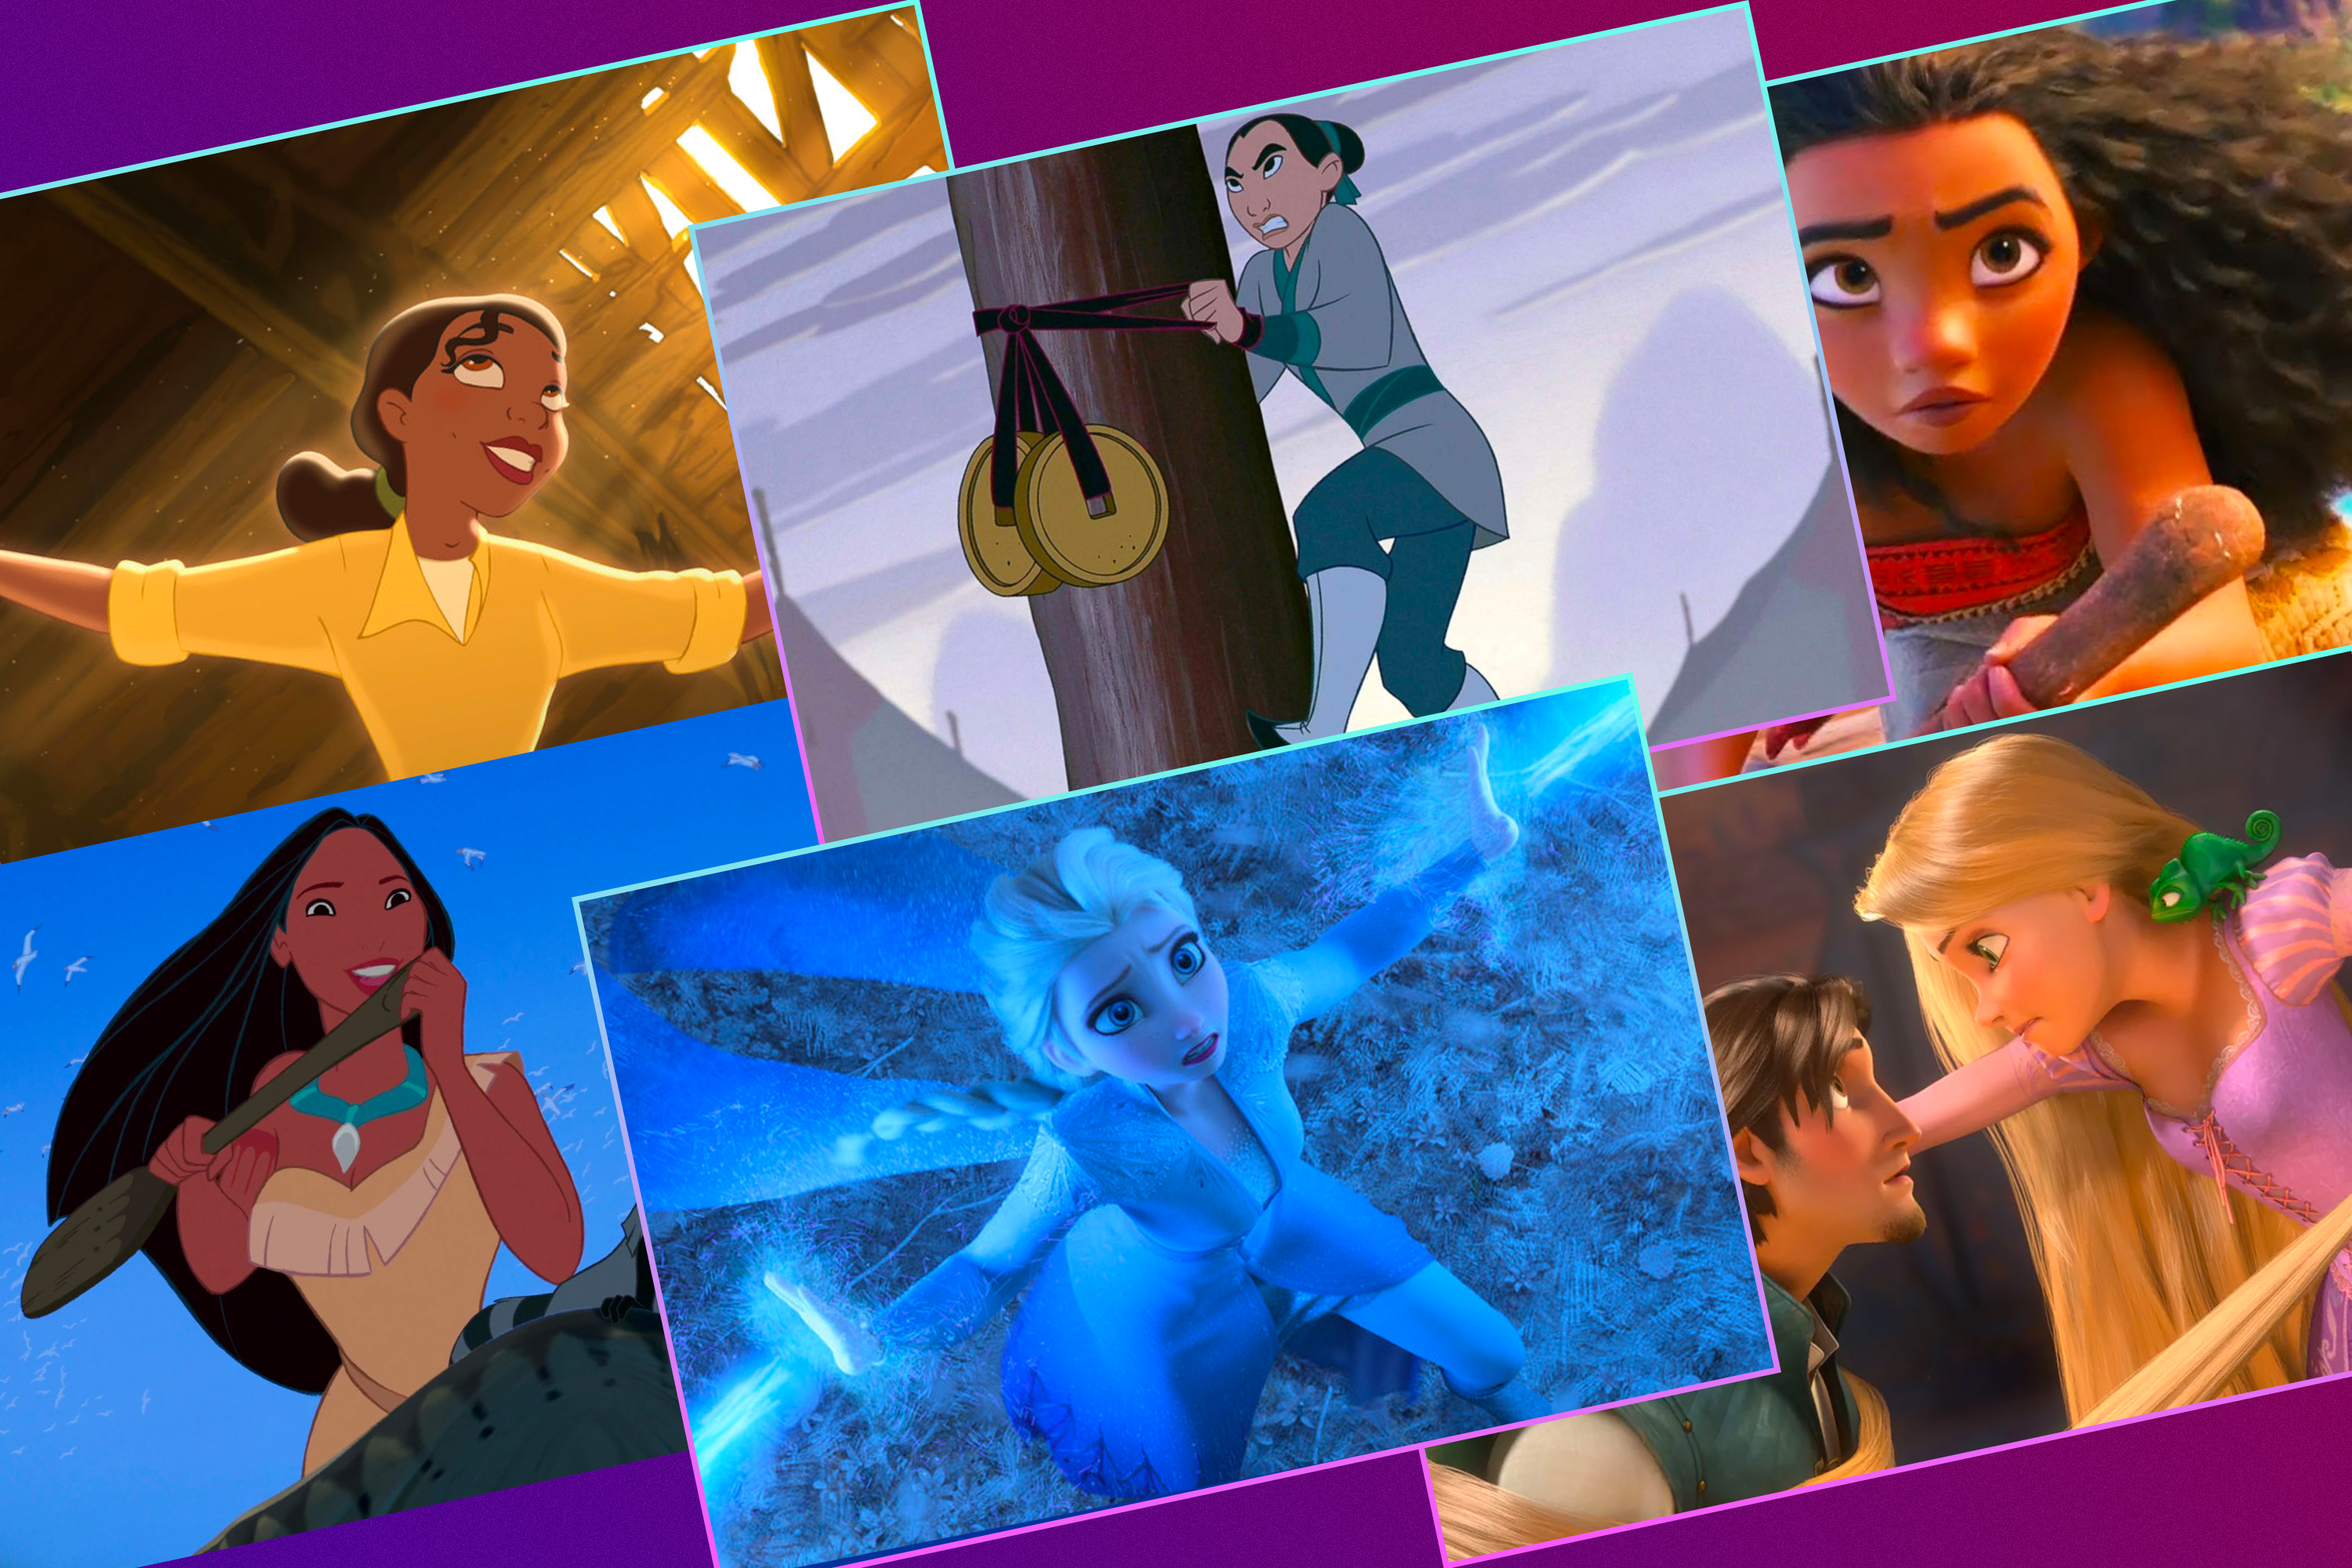 A six-panel grid collage of Disney Princesses, featuring Tiana singing in an empty warehouse, Mulan climbing the pole, Moana on her boat, Pocahontas on her canoe, Elsa wielding her ice powers, and Rapunzel holding Flynn captive. 